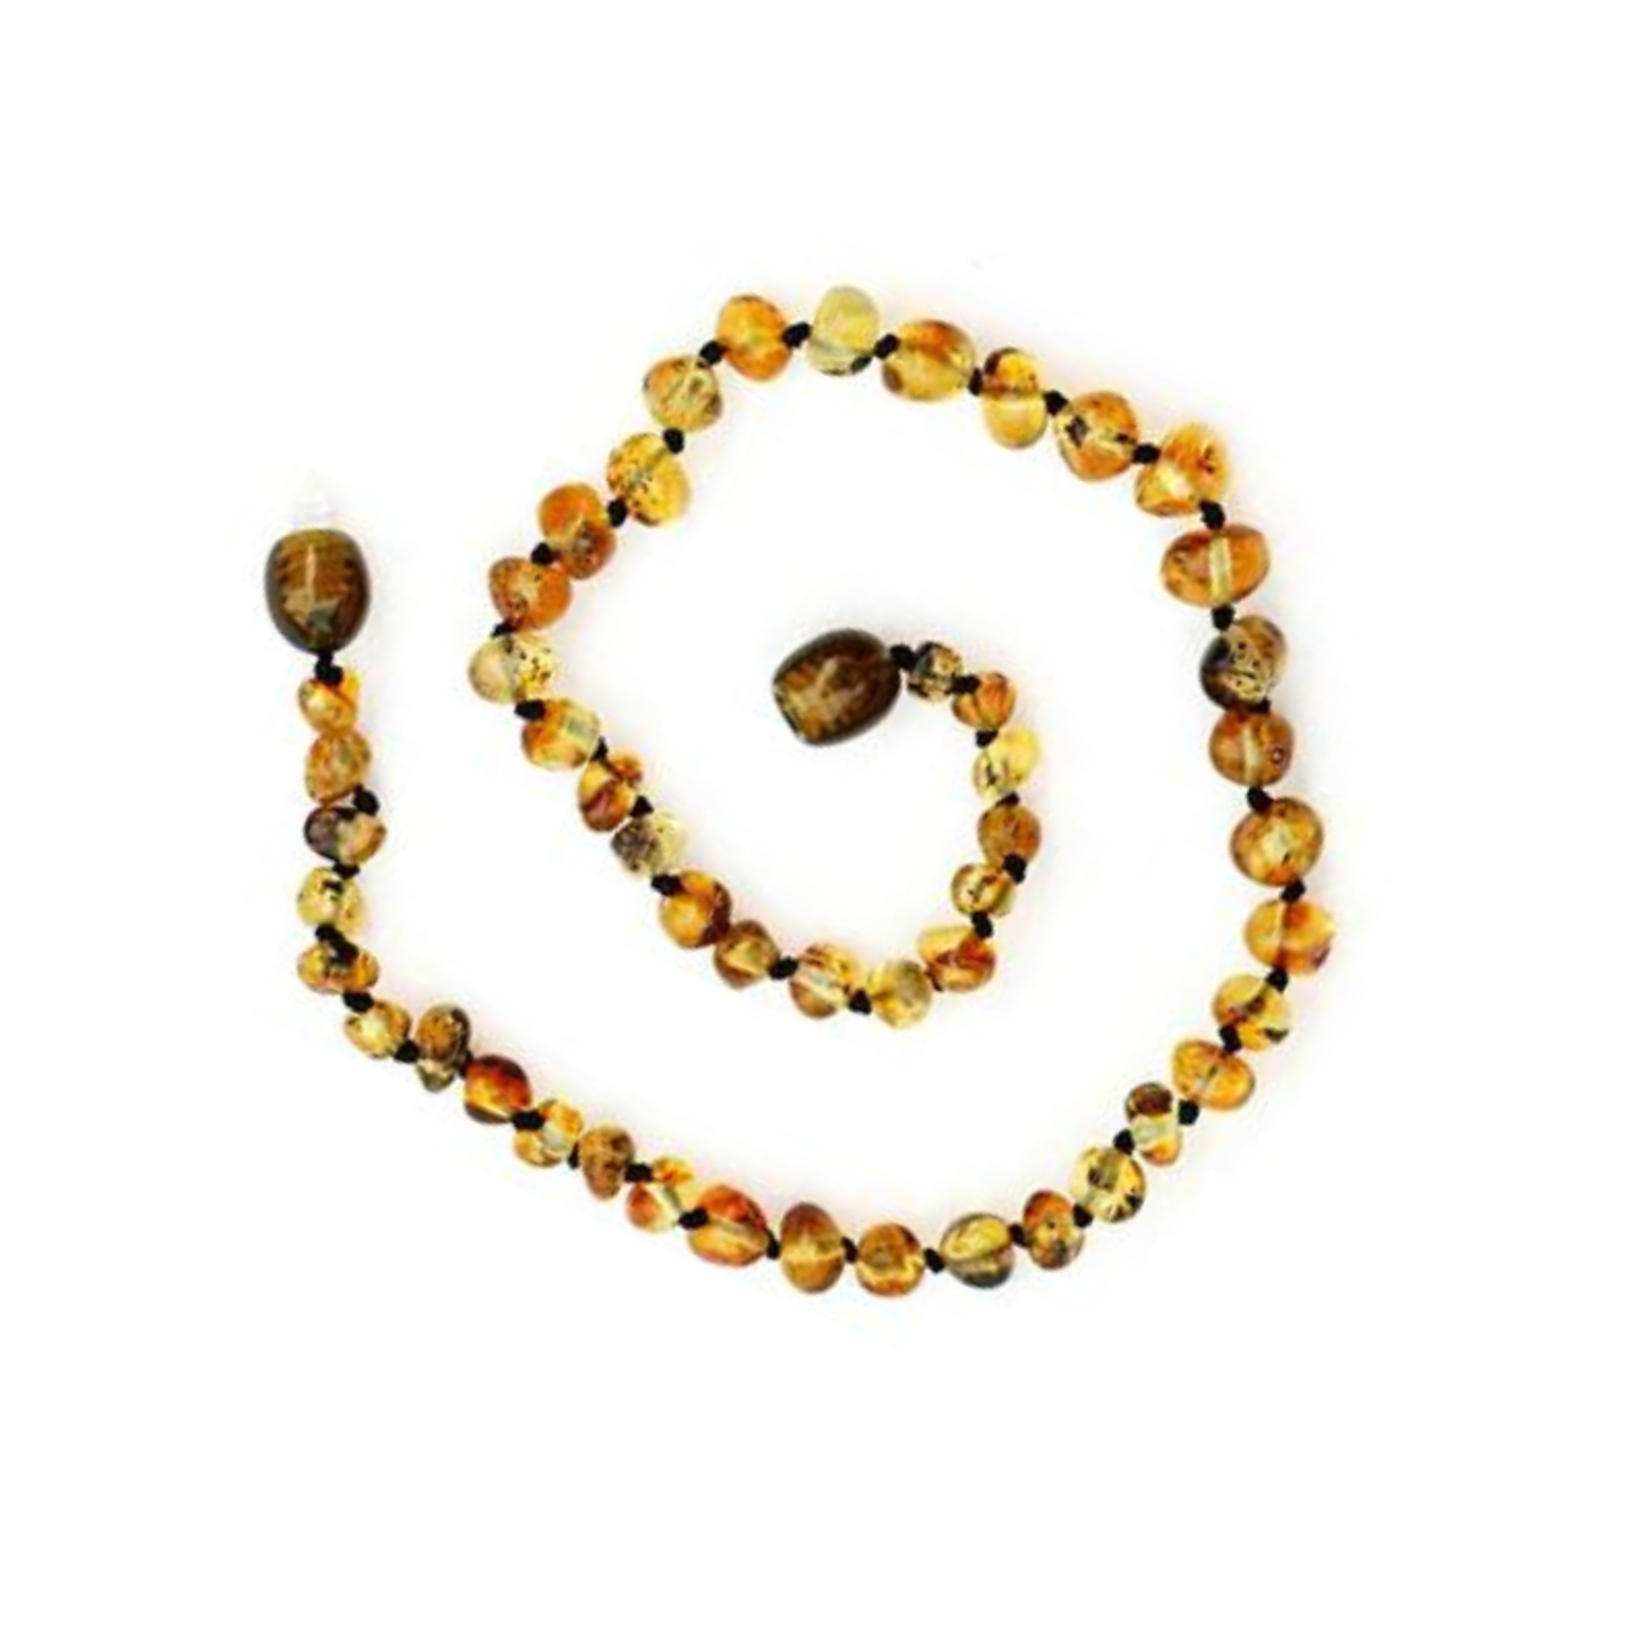 Healing Amber Healing Amber Necklace Olive Bean